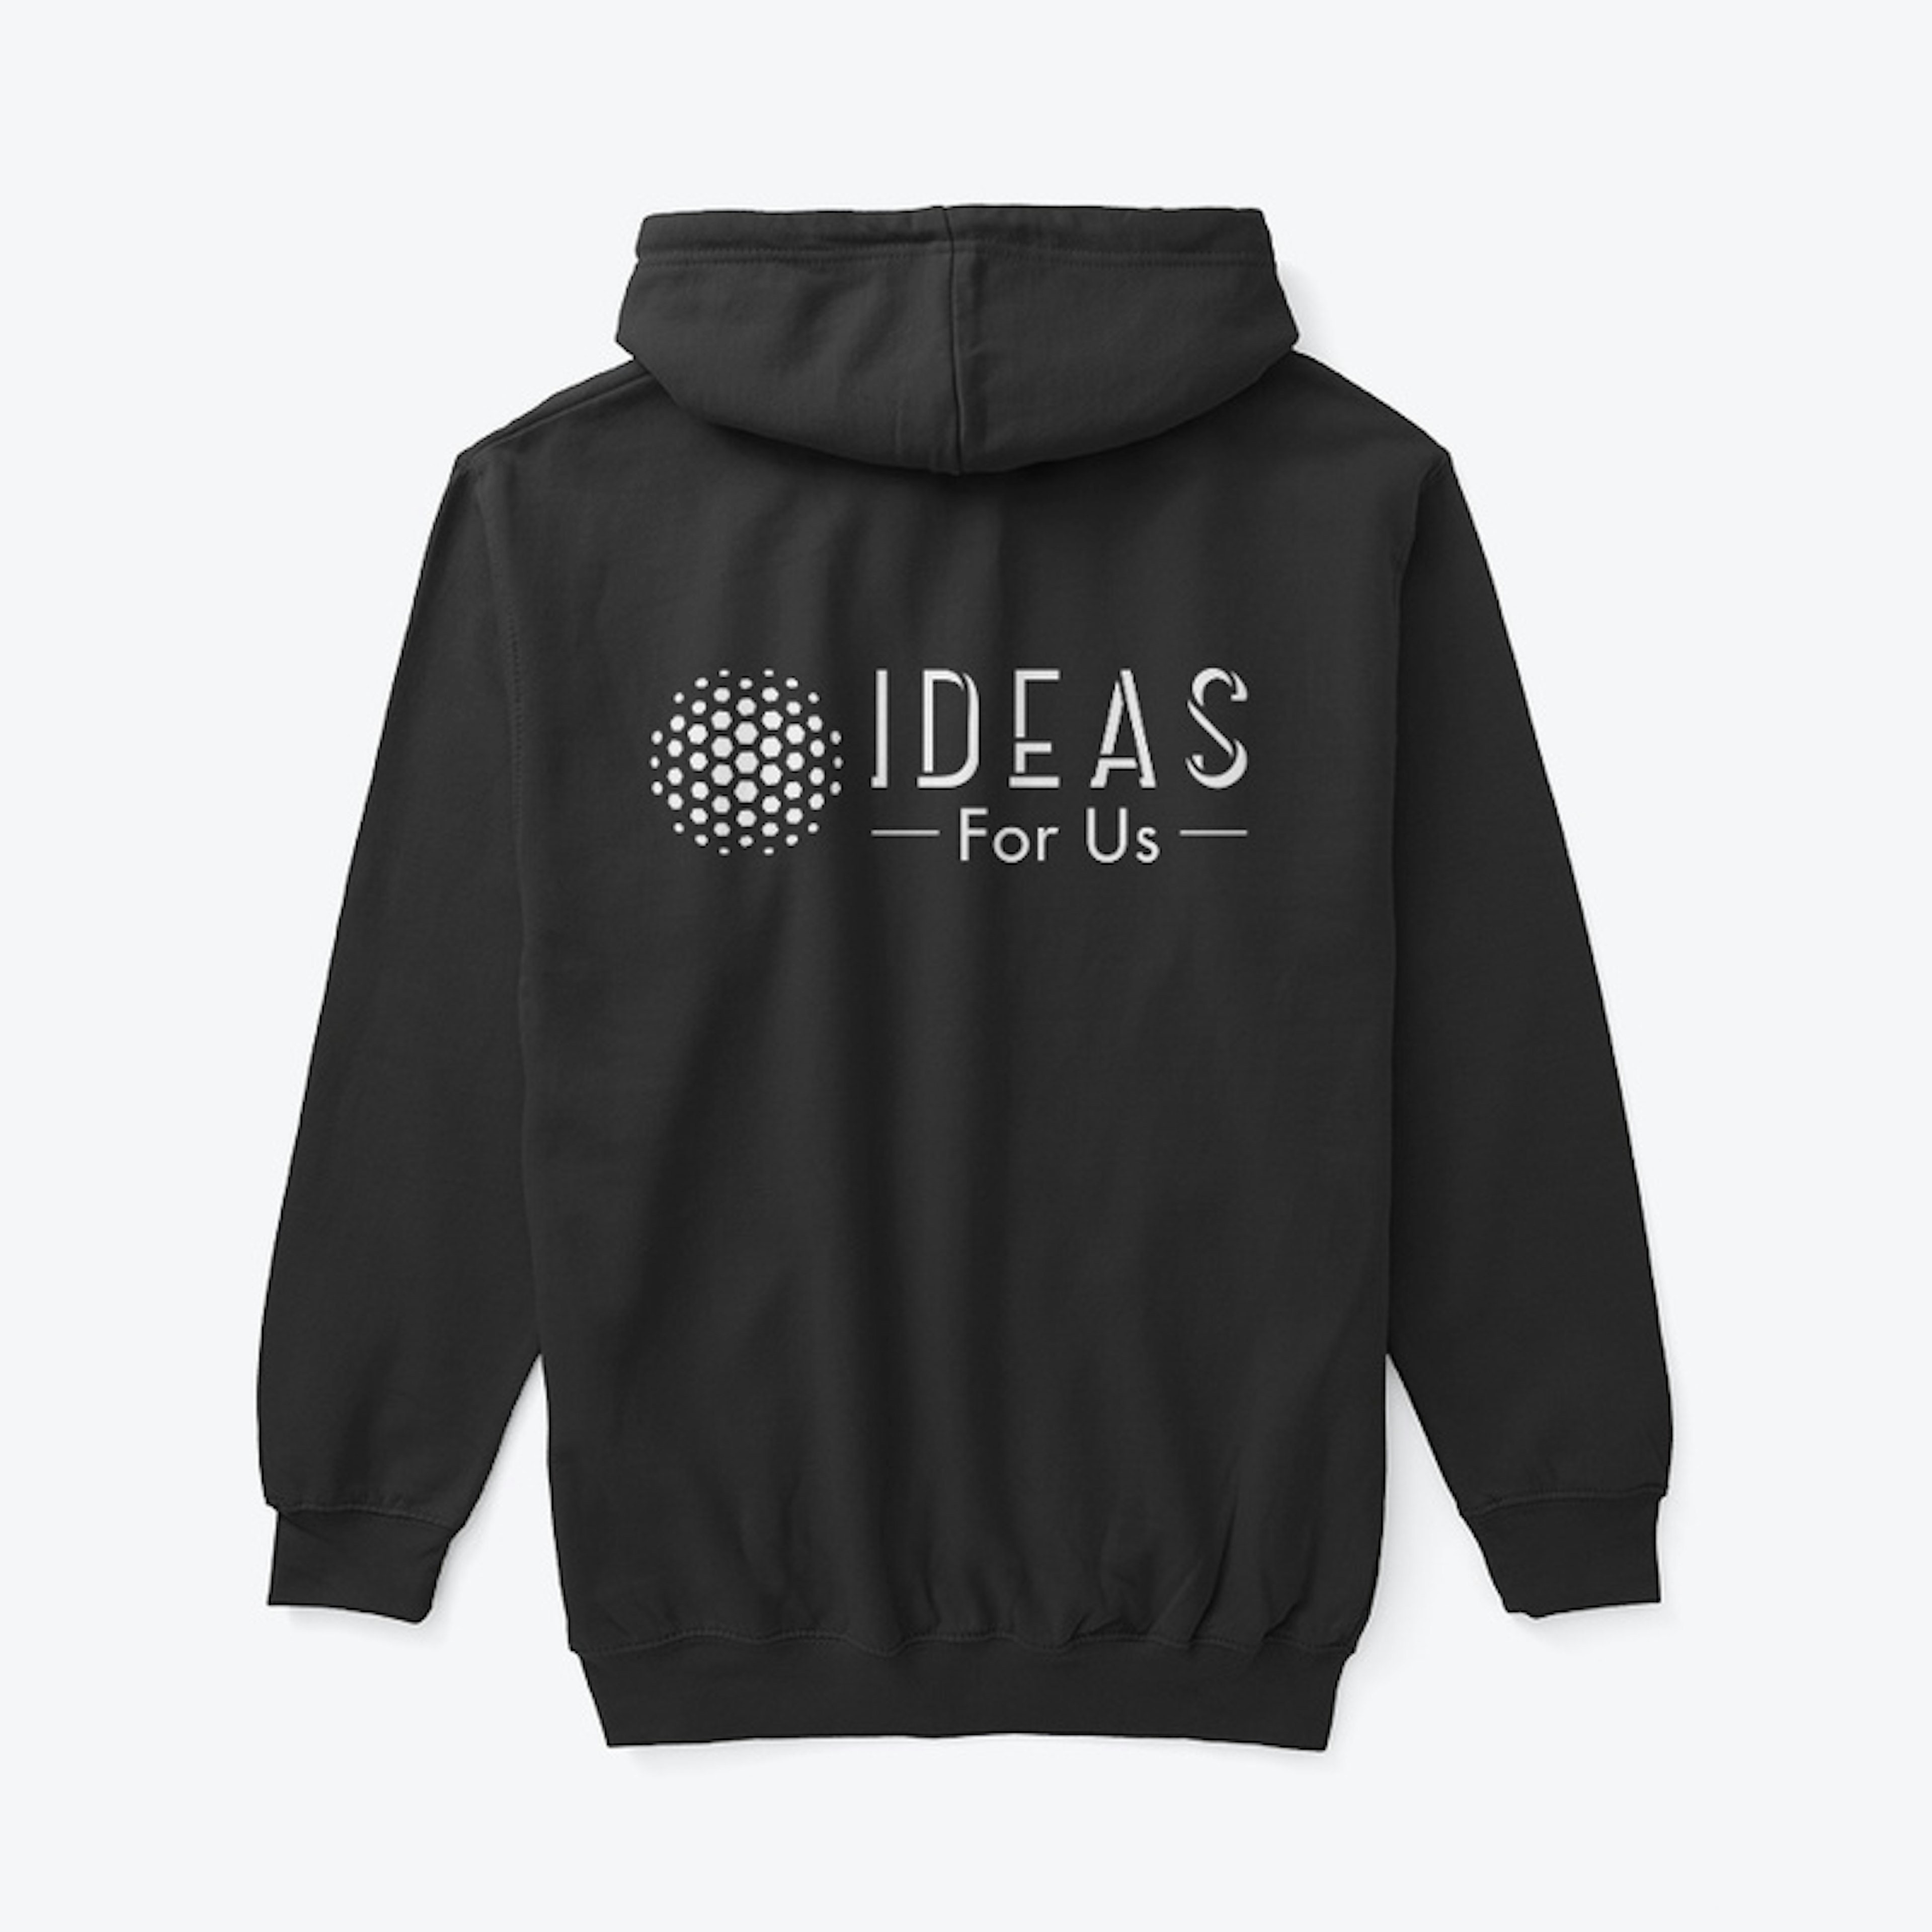 IDEAS For Us Hoodie